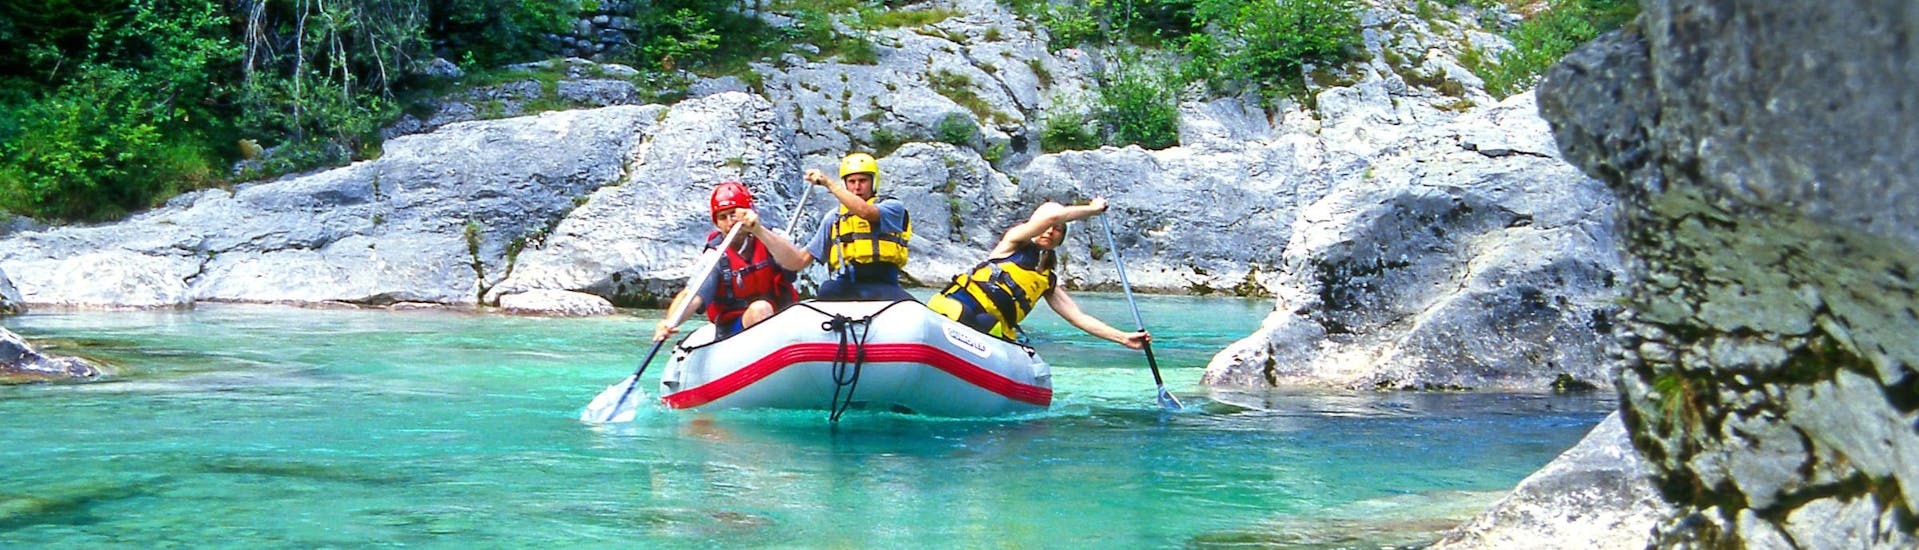 A group of young people enjoying some white water rafting fun in the rafting & canyoning hotspot of Soča.